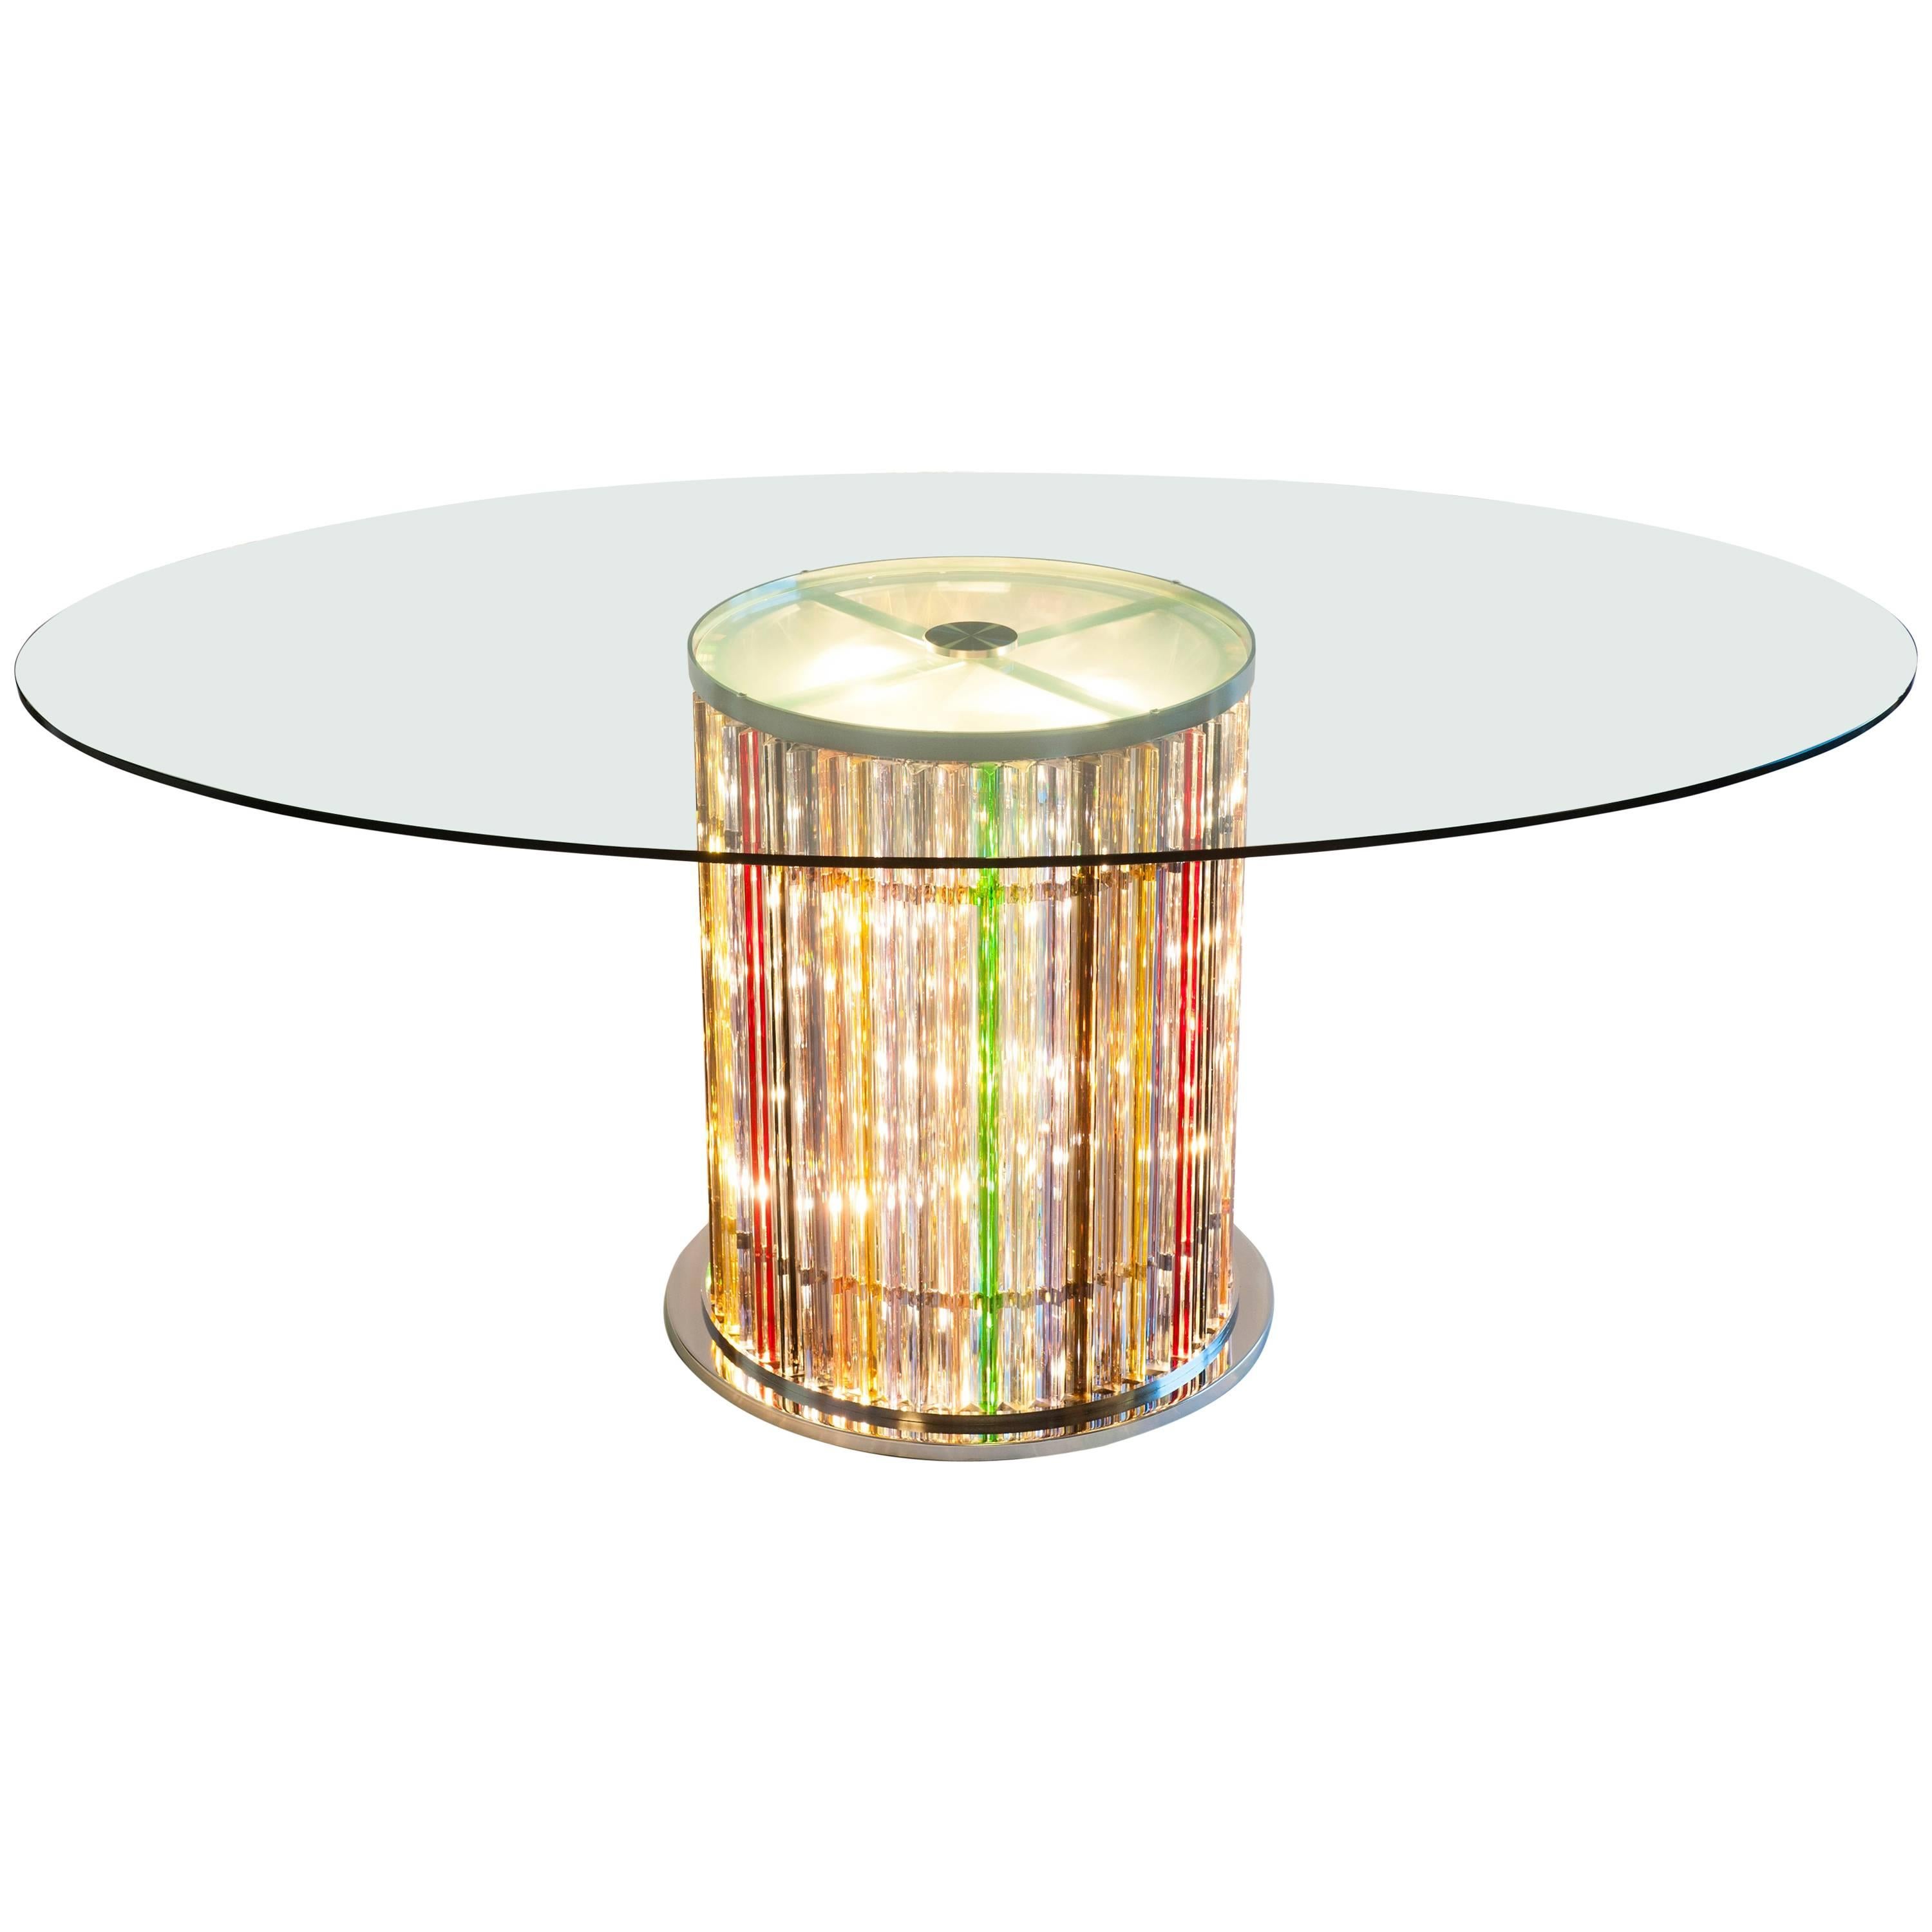 Murano Glass Dining Table with Embedded Stem Lights by Giovanni Dalla Fina Italy